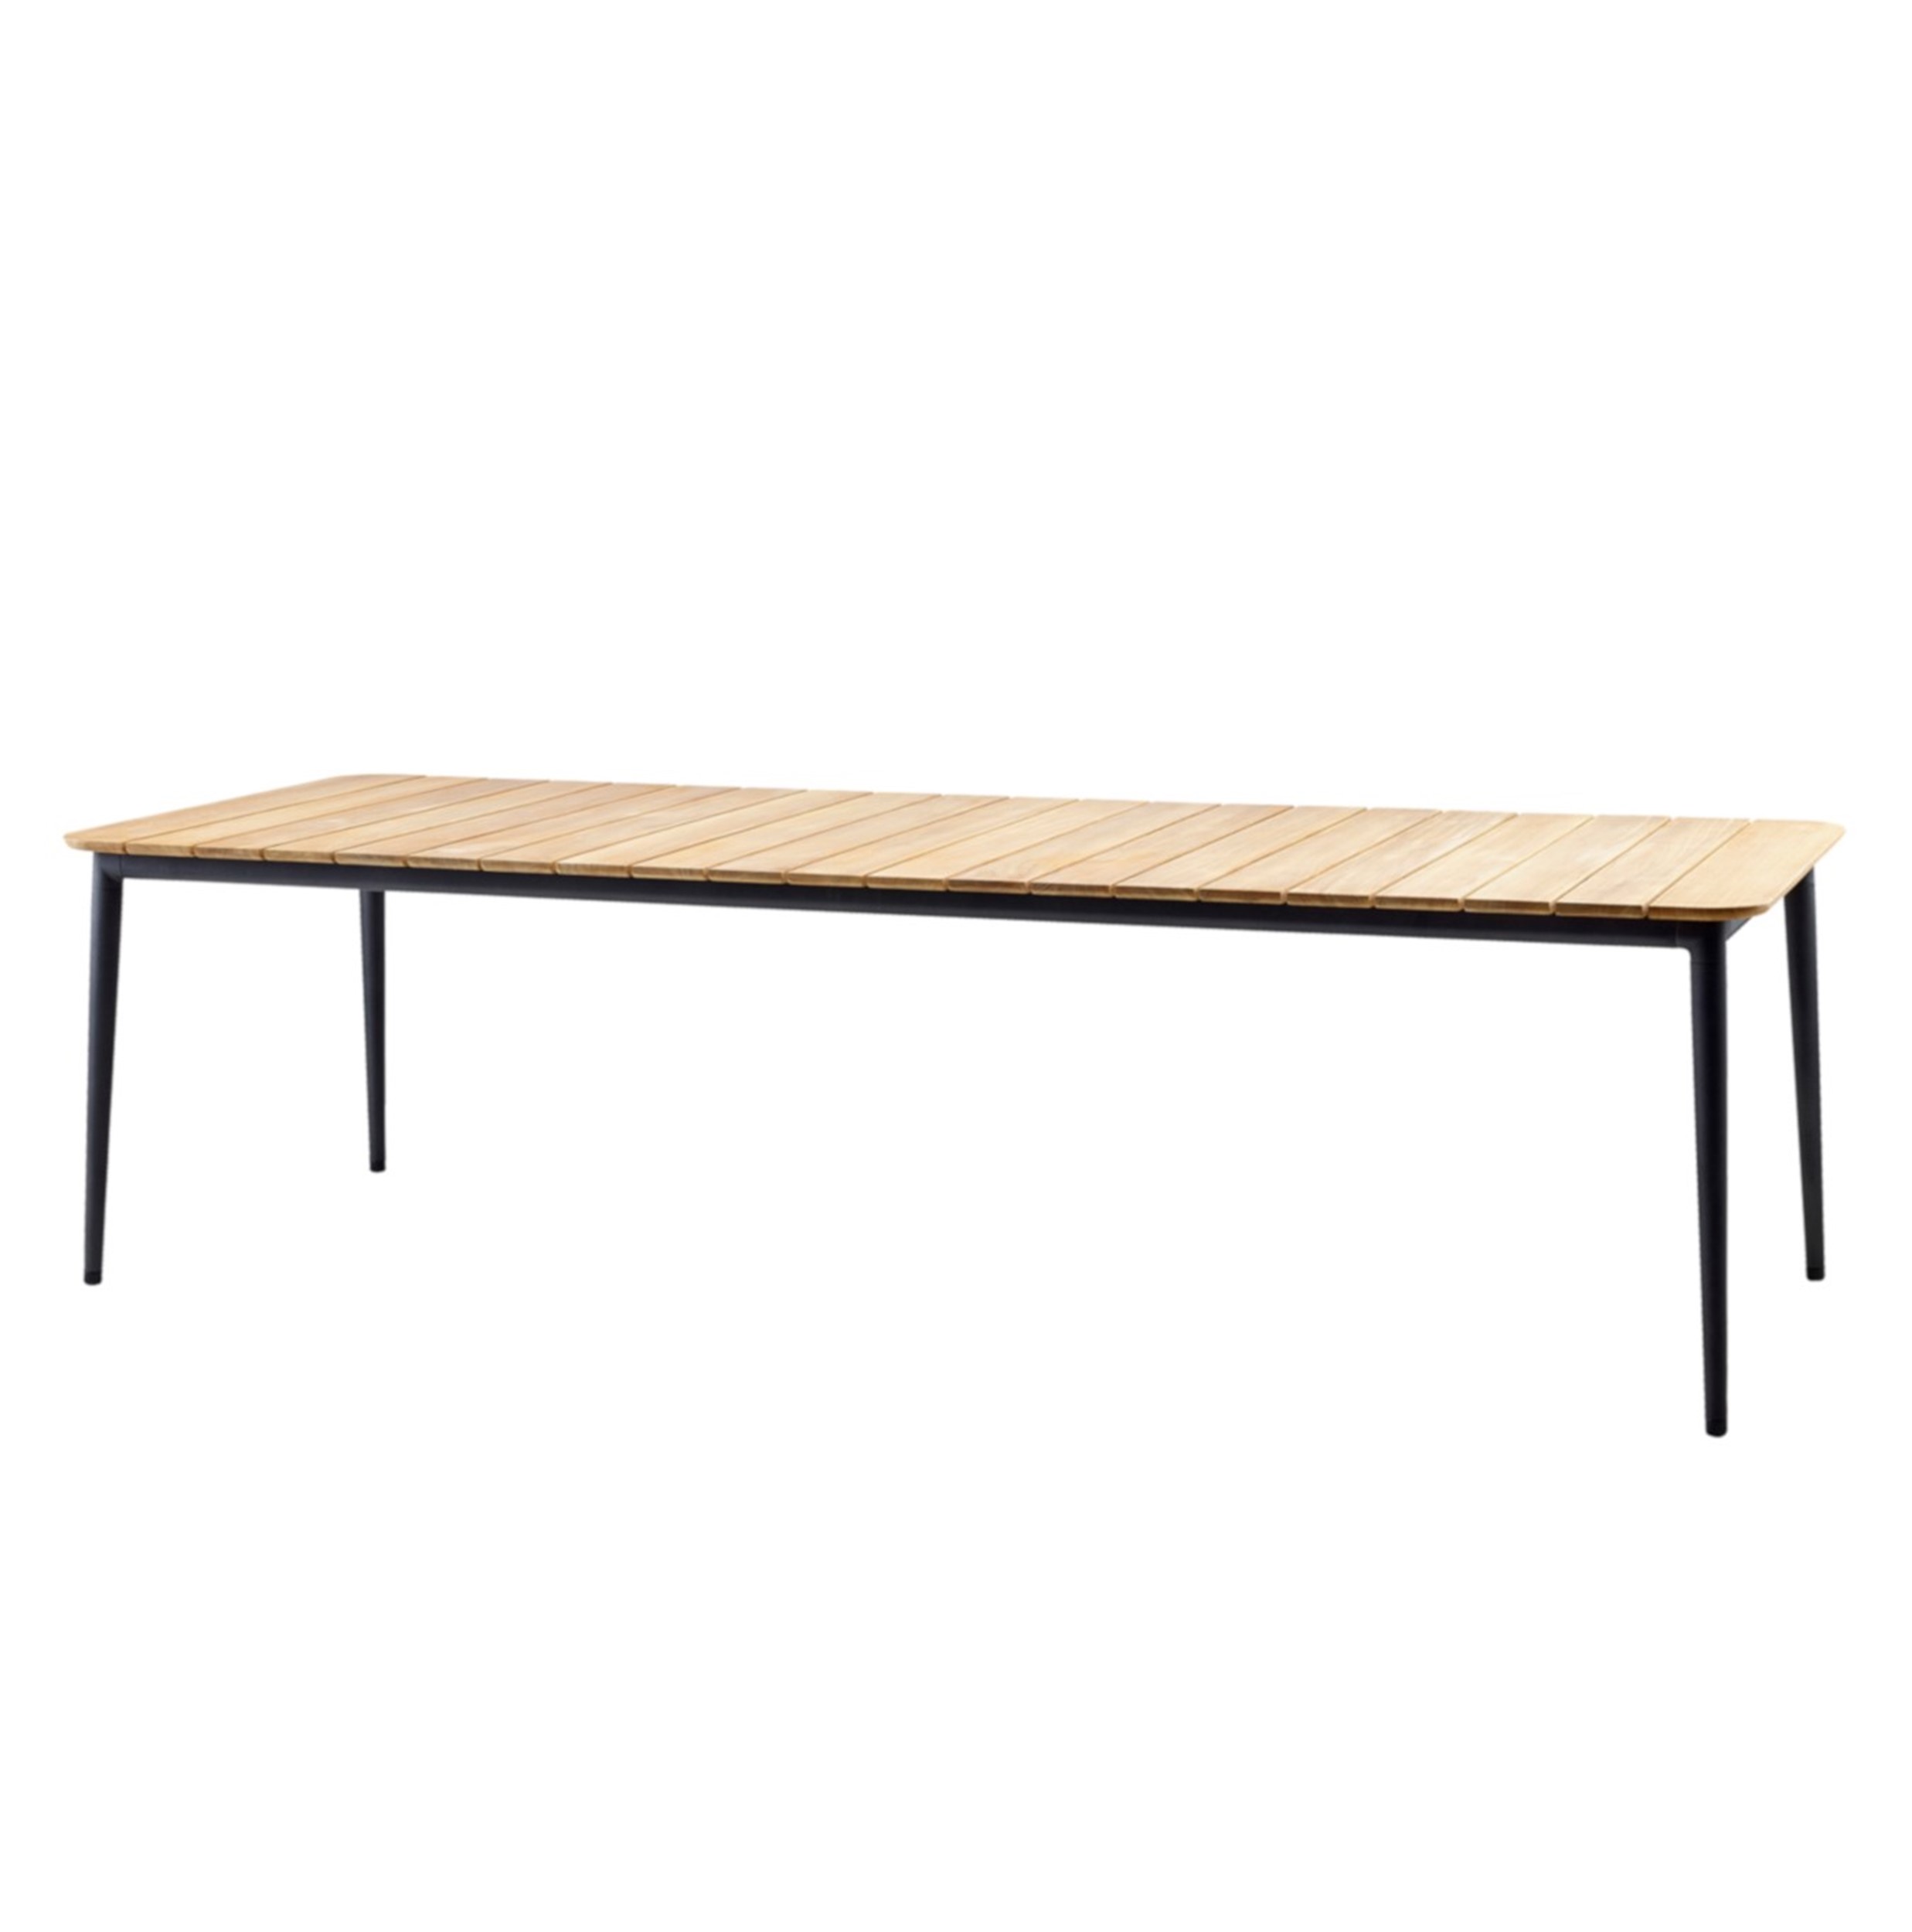 Picture of CORE TABLE 274 x 100 cm